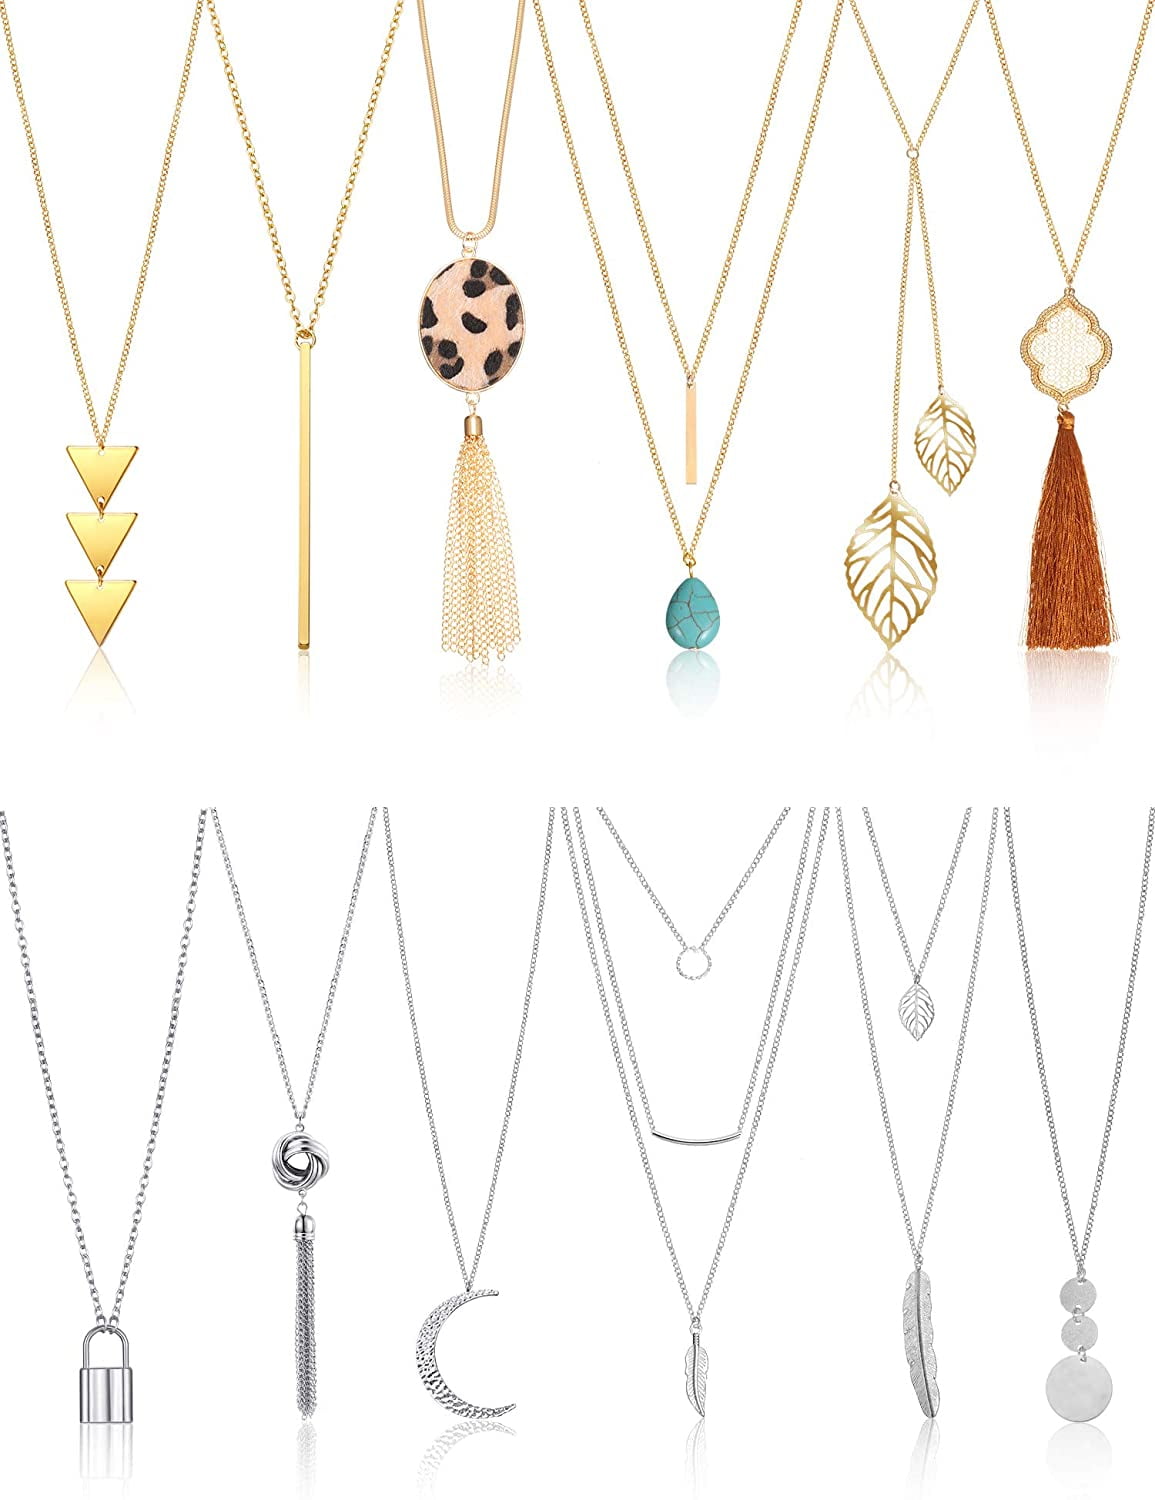 12 Pcs Long Pendant Necklace for Women, Gold Bar Feather Triangle Leaf Lock  Tassel Y Necklace Jewelry Set for Girls - Walmart.com